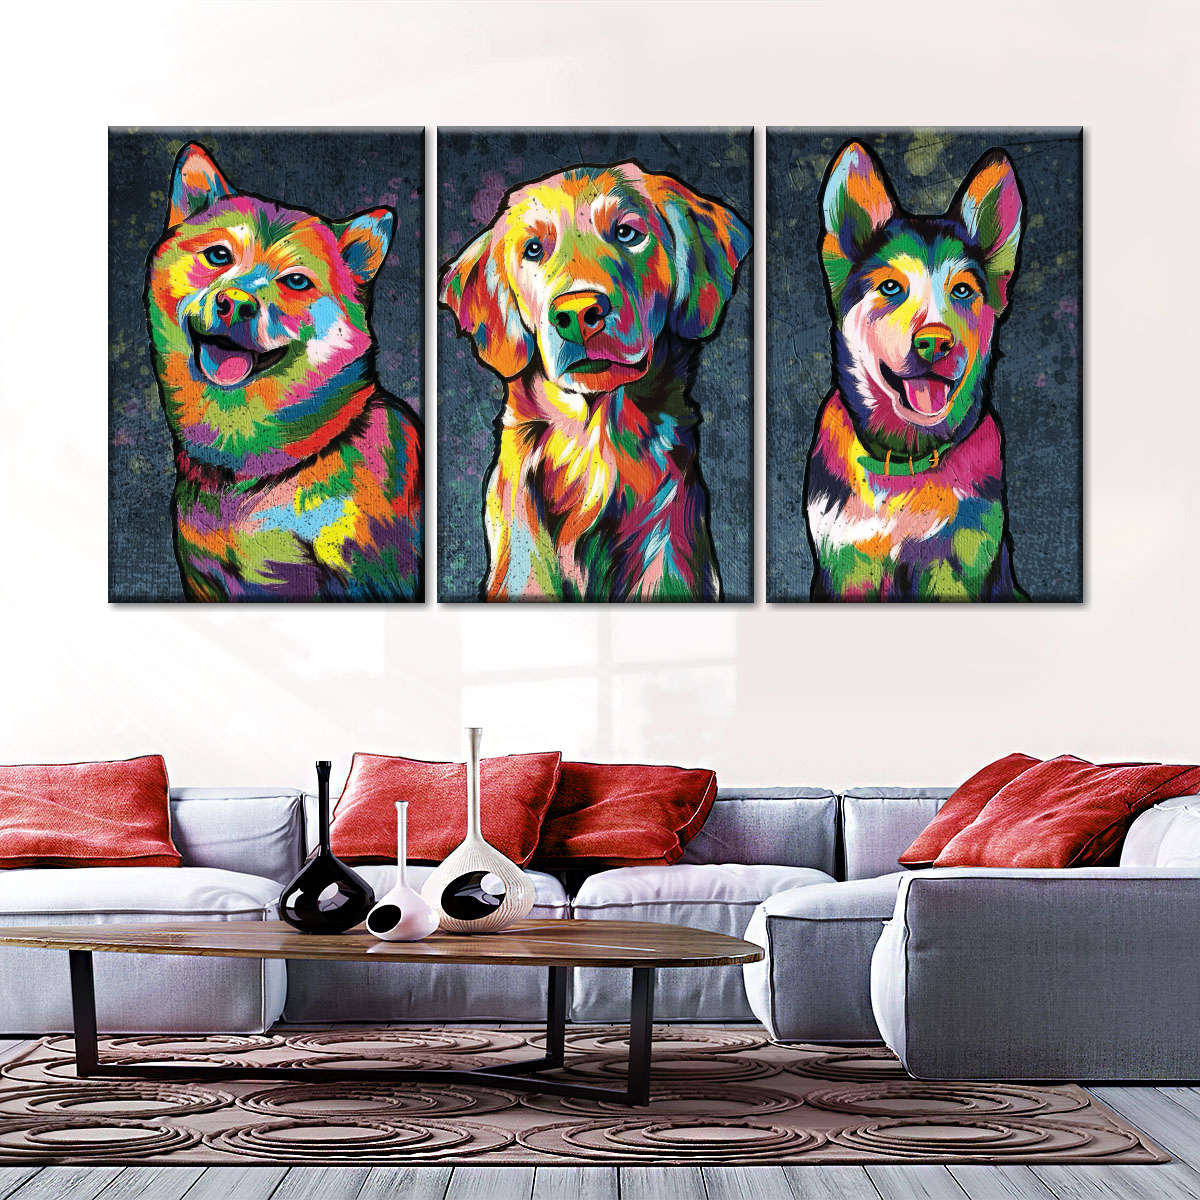 15 Best Dog Wall Art for 2023